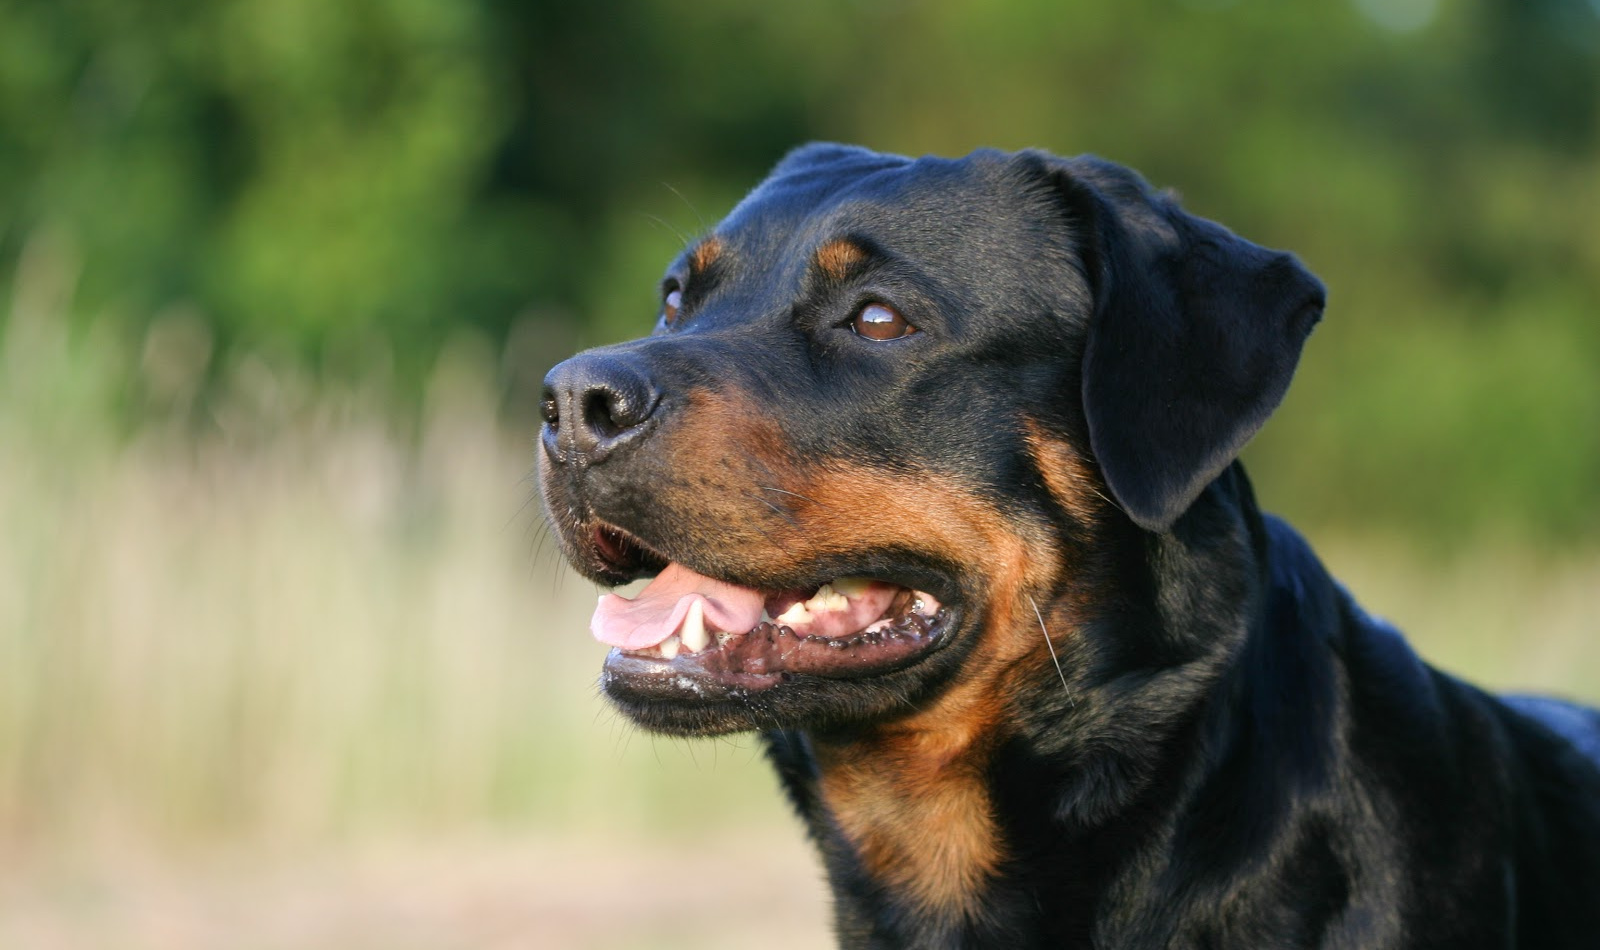 These Rottweiler training commands will help you teach your dogs manners and to look to you for guidance. Try them out today!